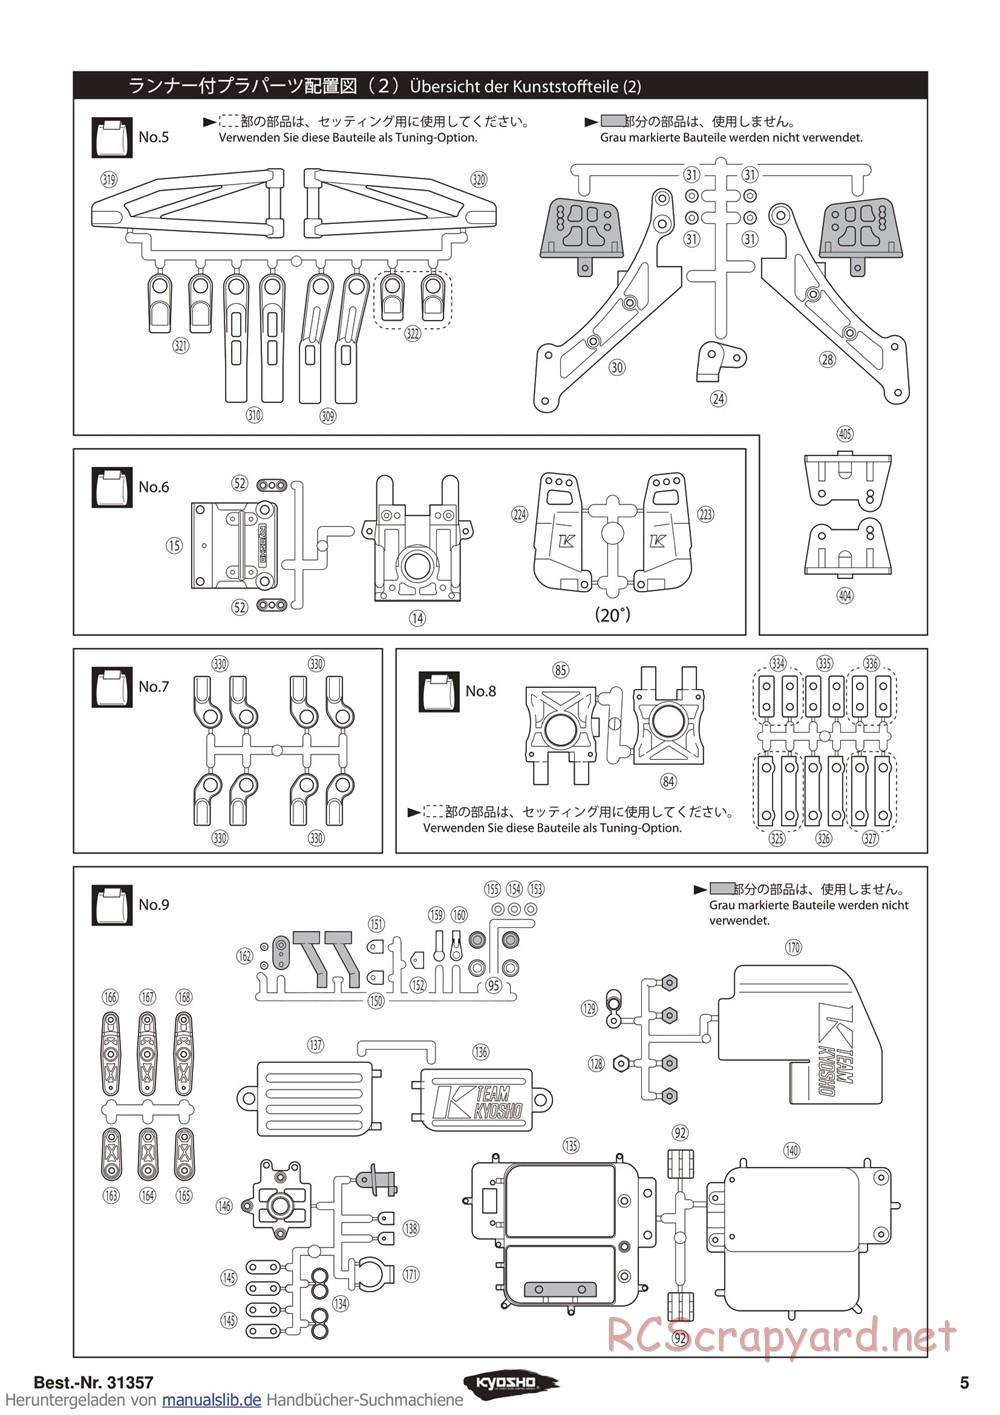 Kyosho - Inferno ST-RR Evo - Manual - Page 5